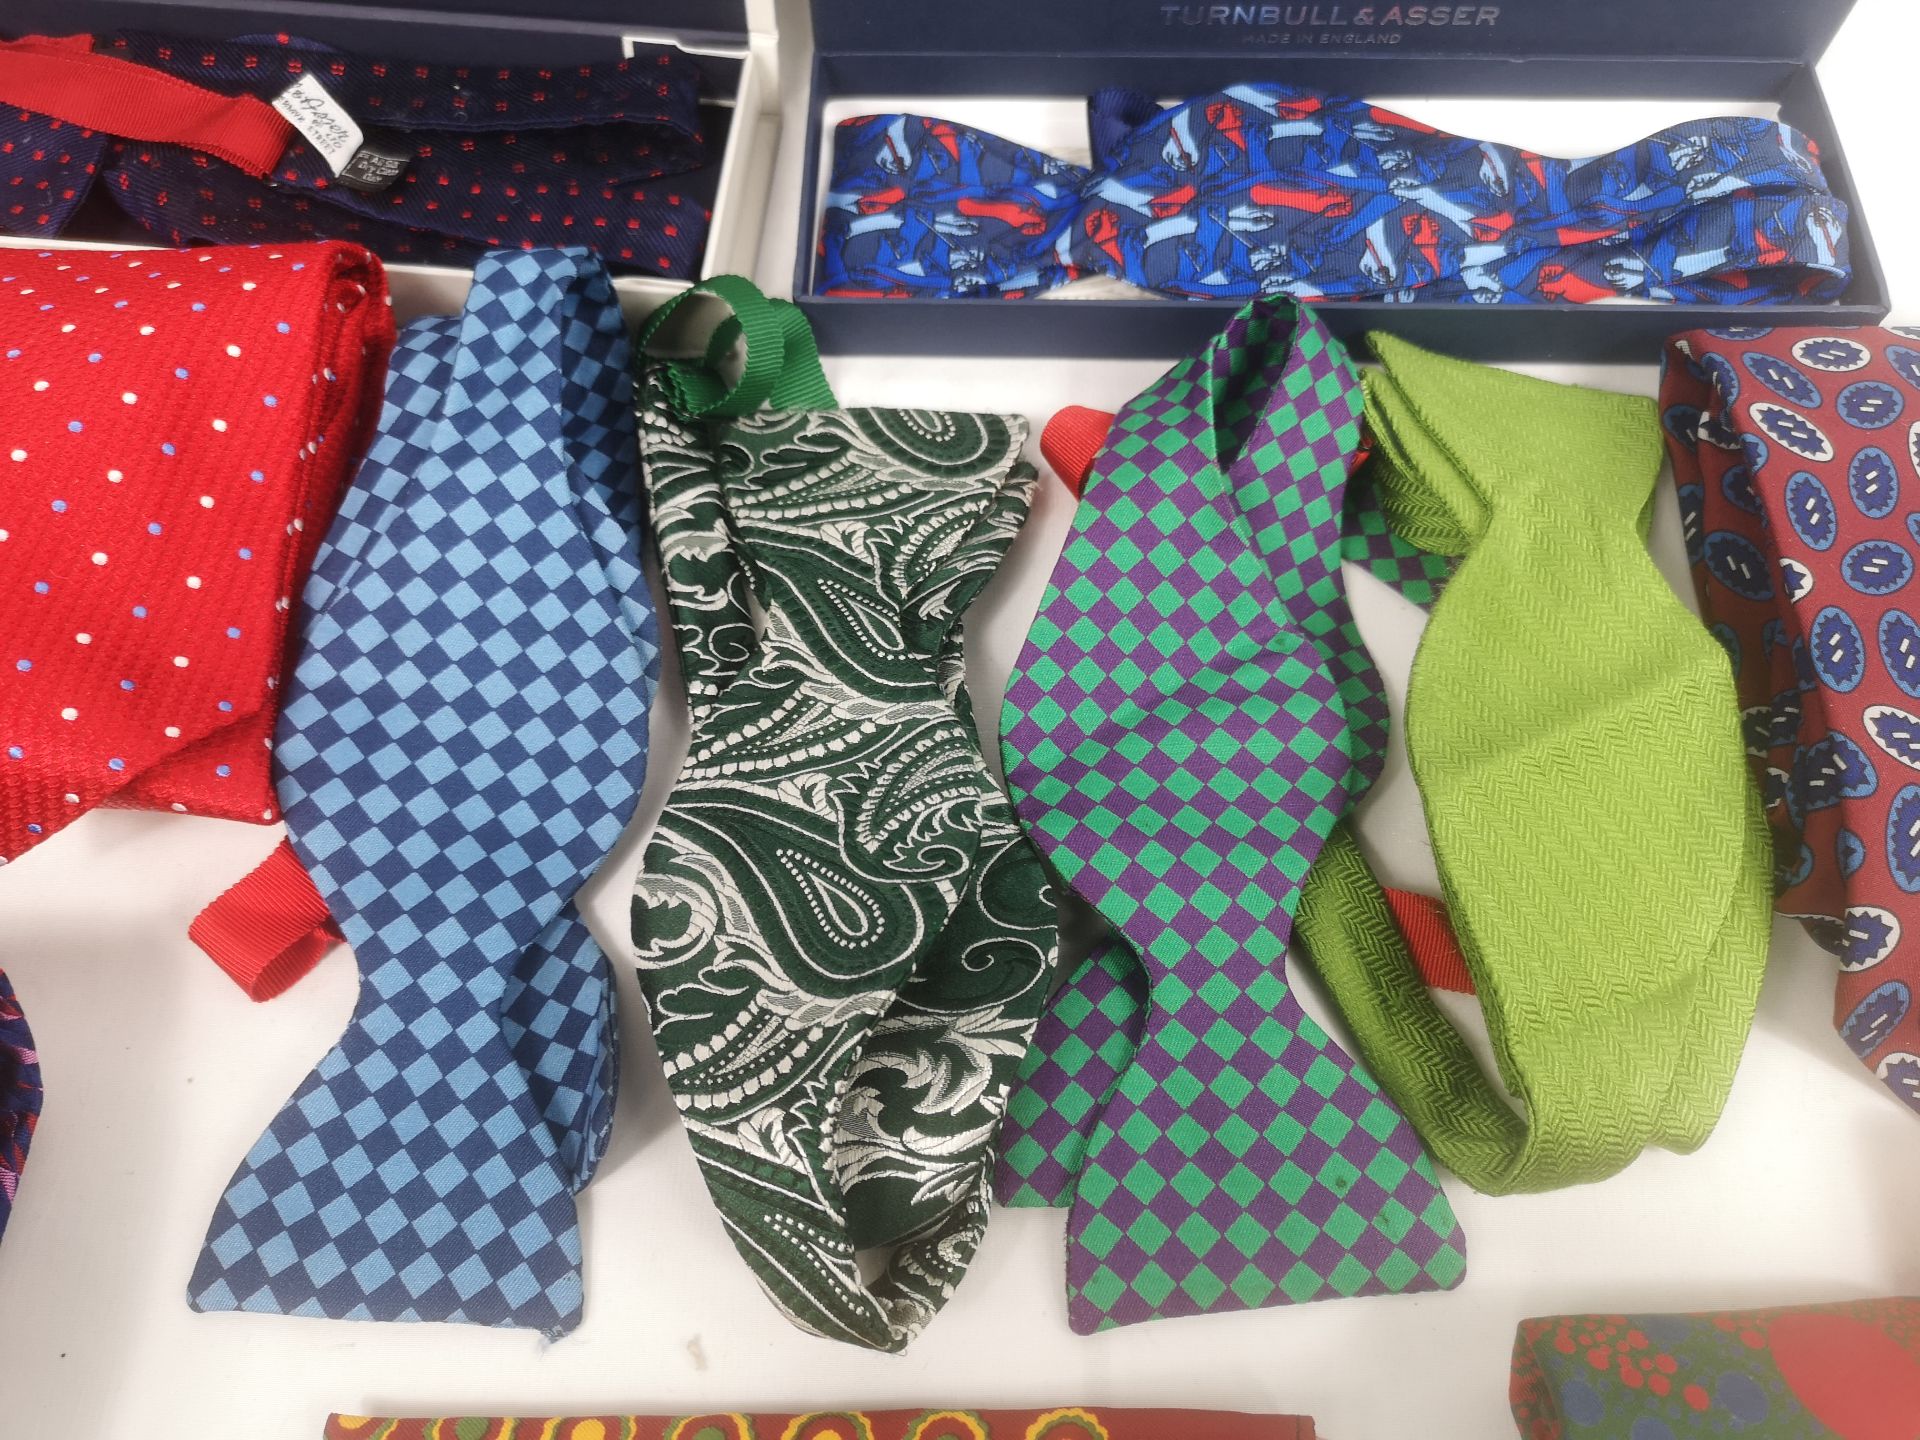 Eight Turnbull and Asser silk ties together with a quantity of Turnbull and Asser bow ties - Image 3 of 5